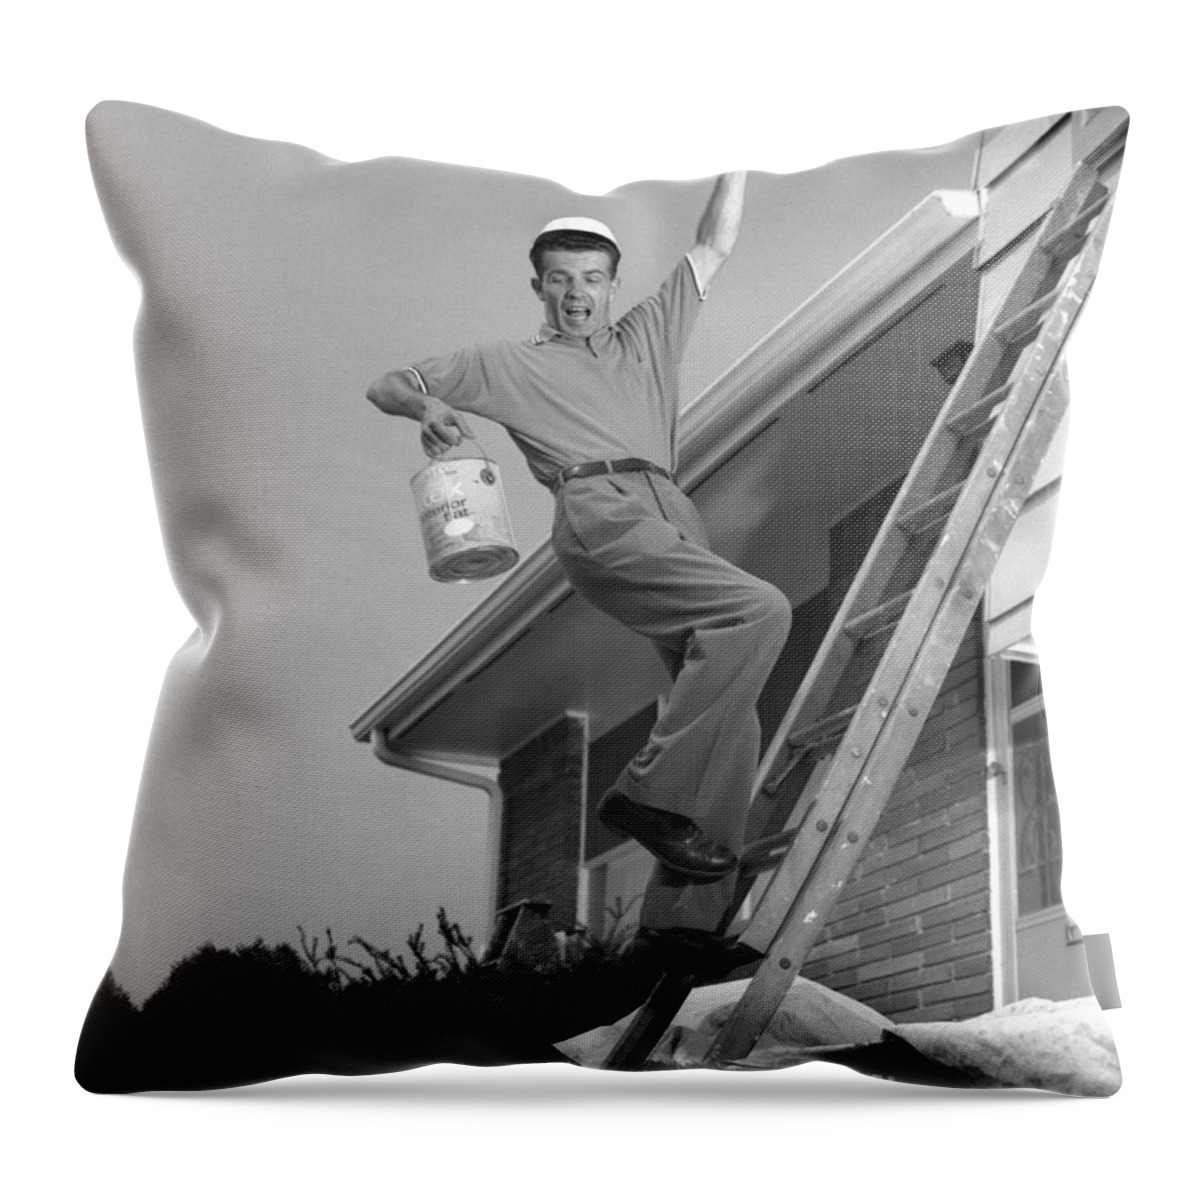 1960s Throw Pillow featuring the photograph Man Falling Off Ladder by H. Armstrong Roberts/ClassicStock